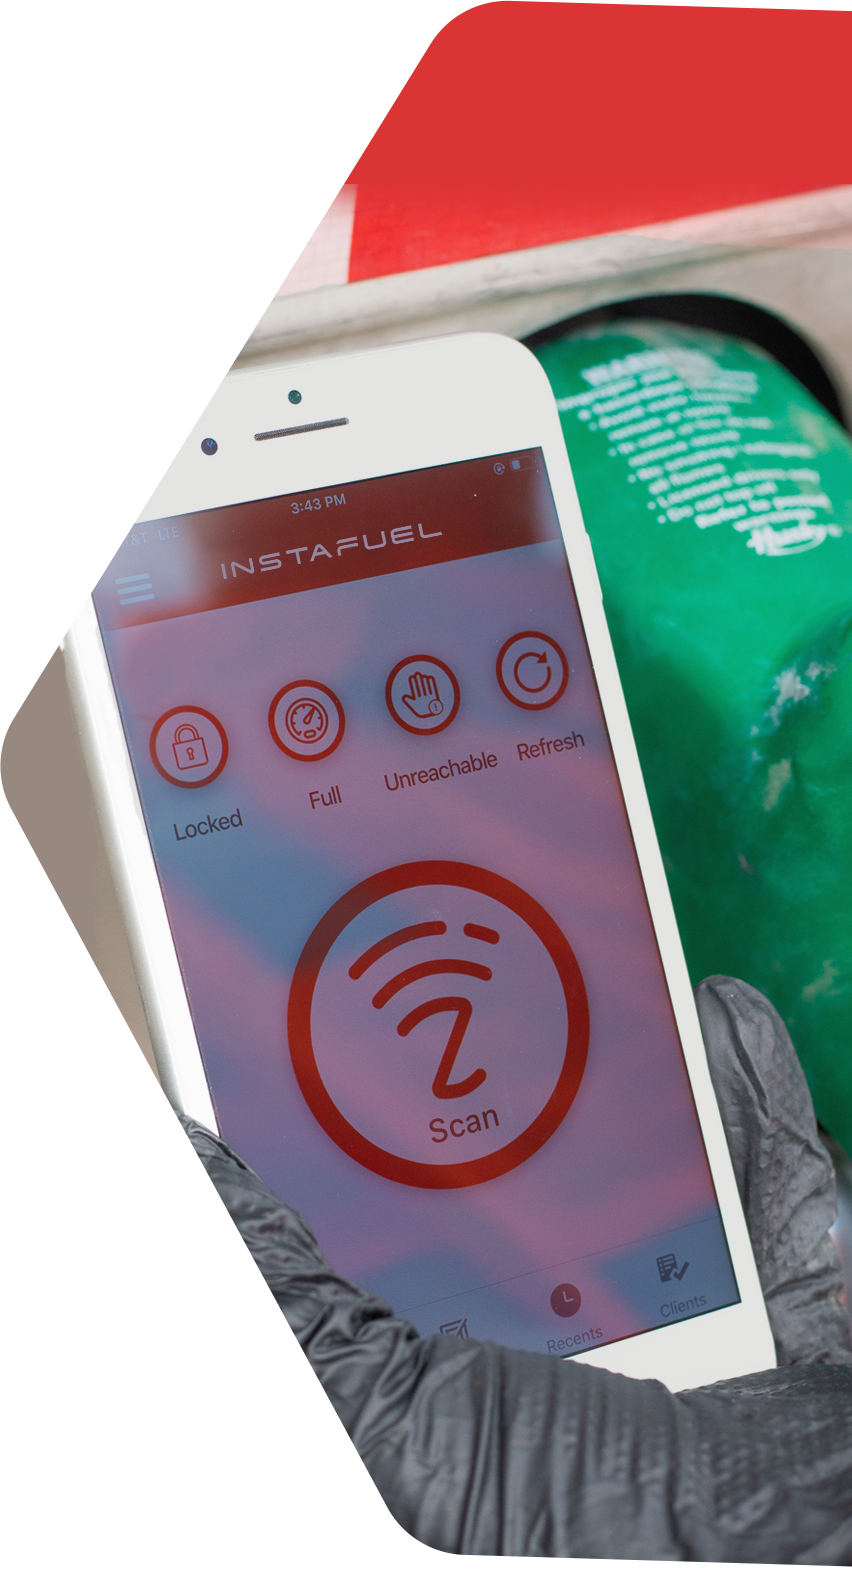 mobile fuel delivery mobile app